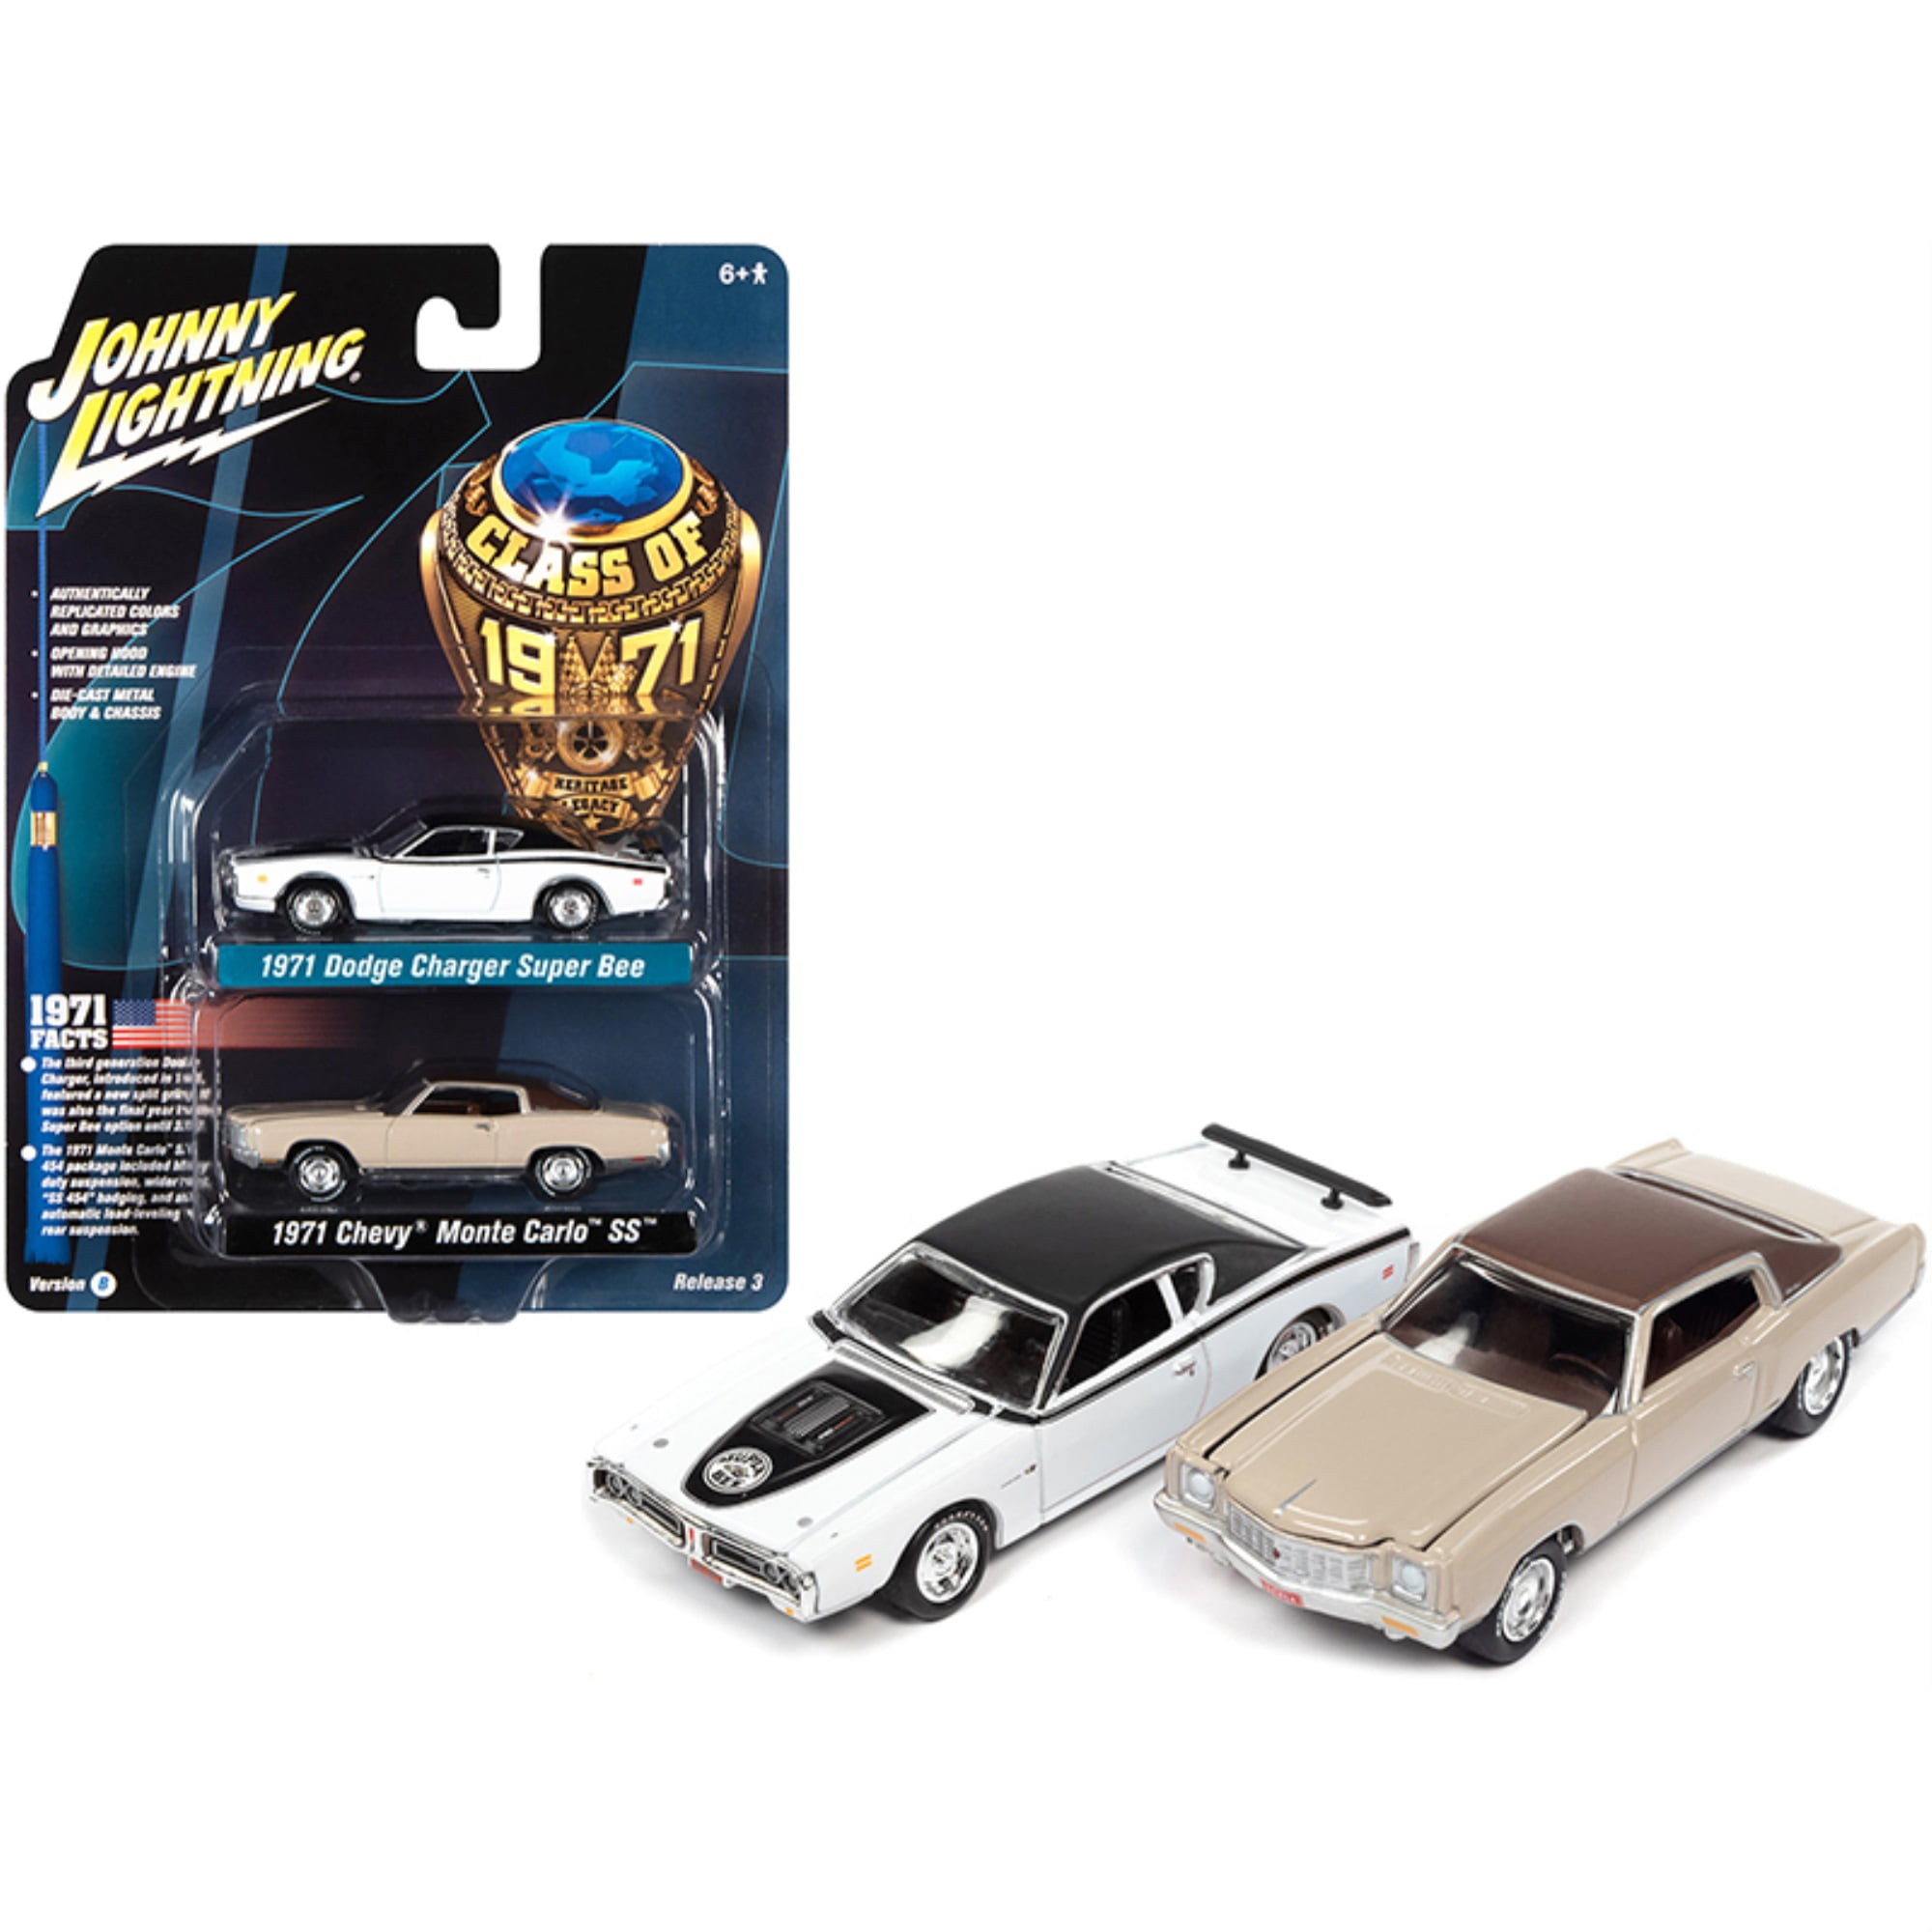 JOHNNY LIGHTNING 2020 CLASSIC GOLD RELEASE 1 CHARGER.. 1973 CADILLAC SET OF 6 